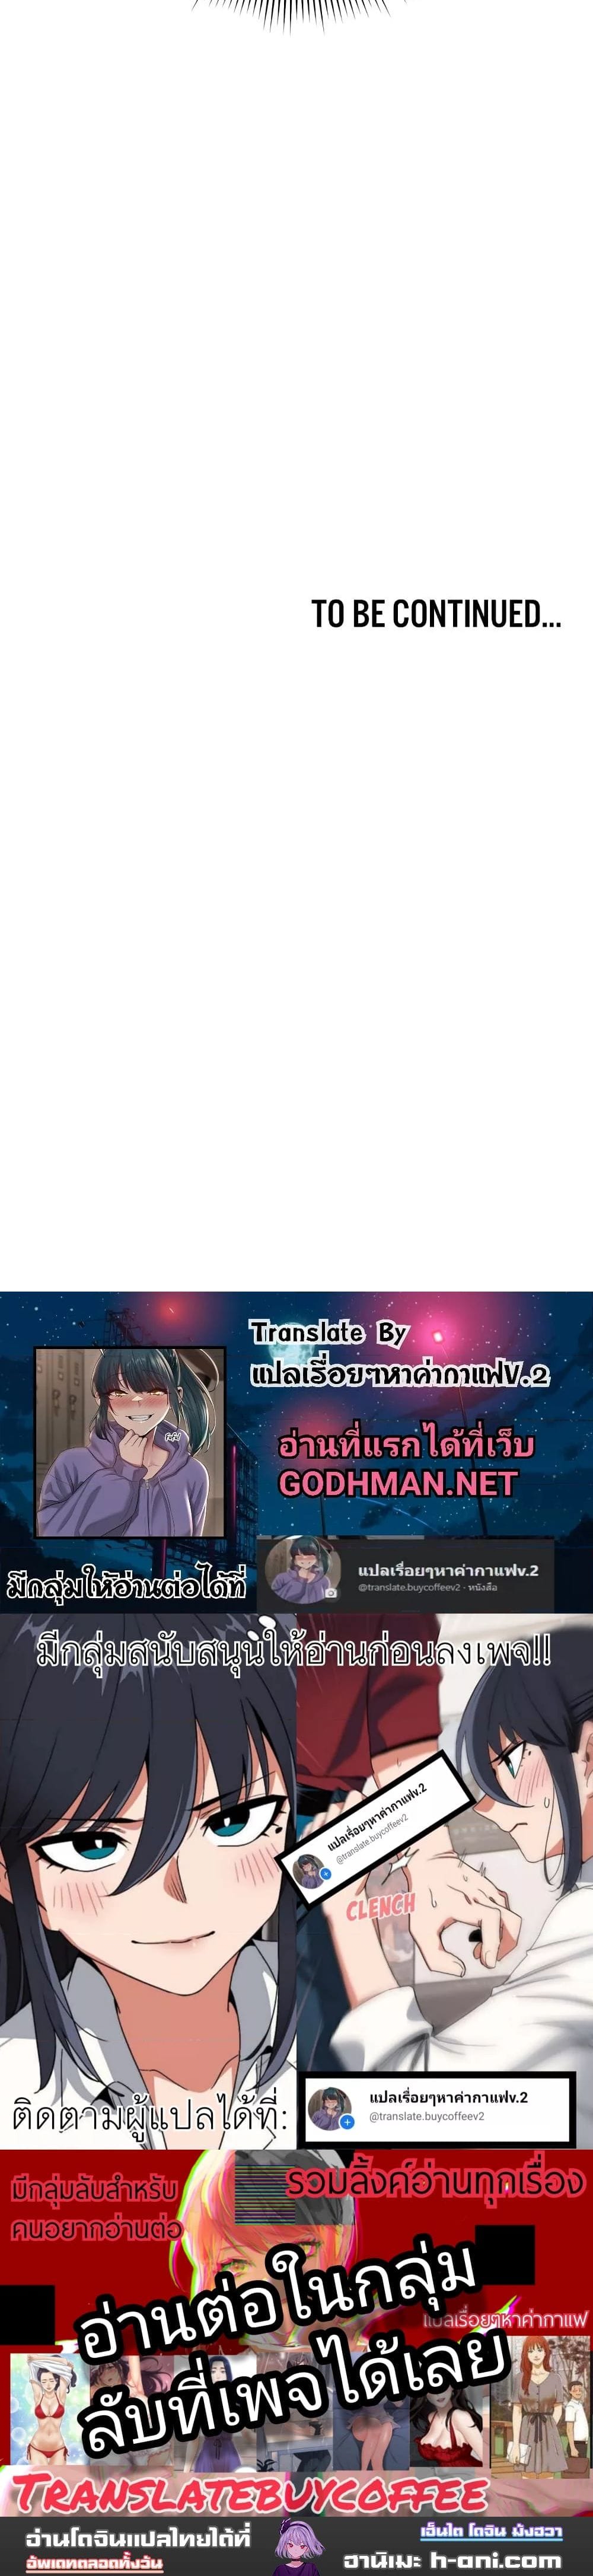 Outsider: The Invisible Man ตอนที่ 11 ภาพ 20